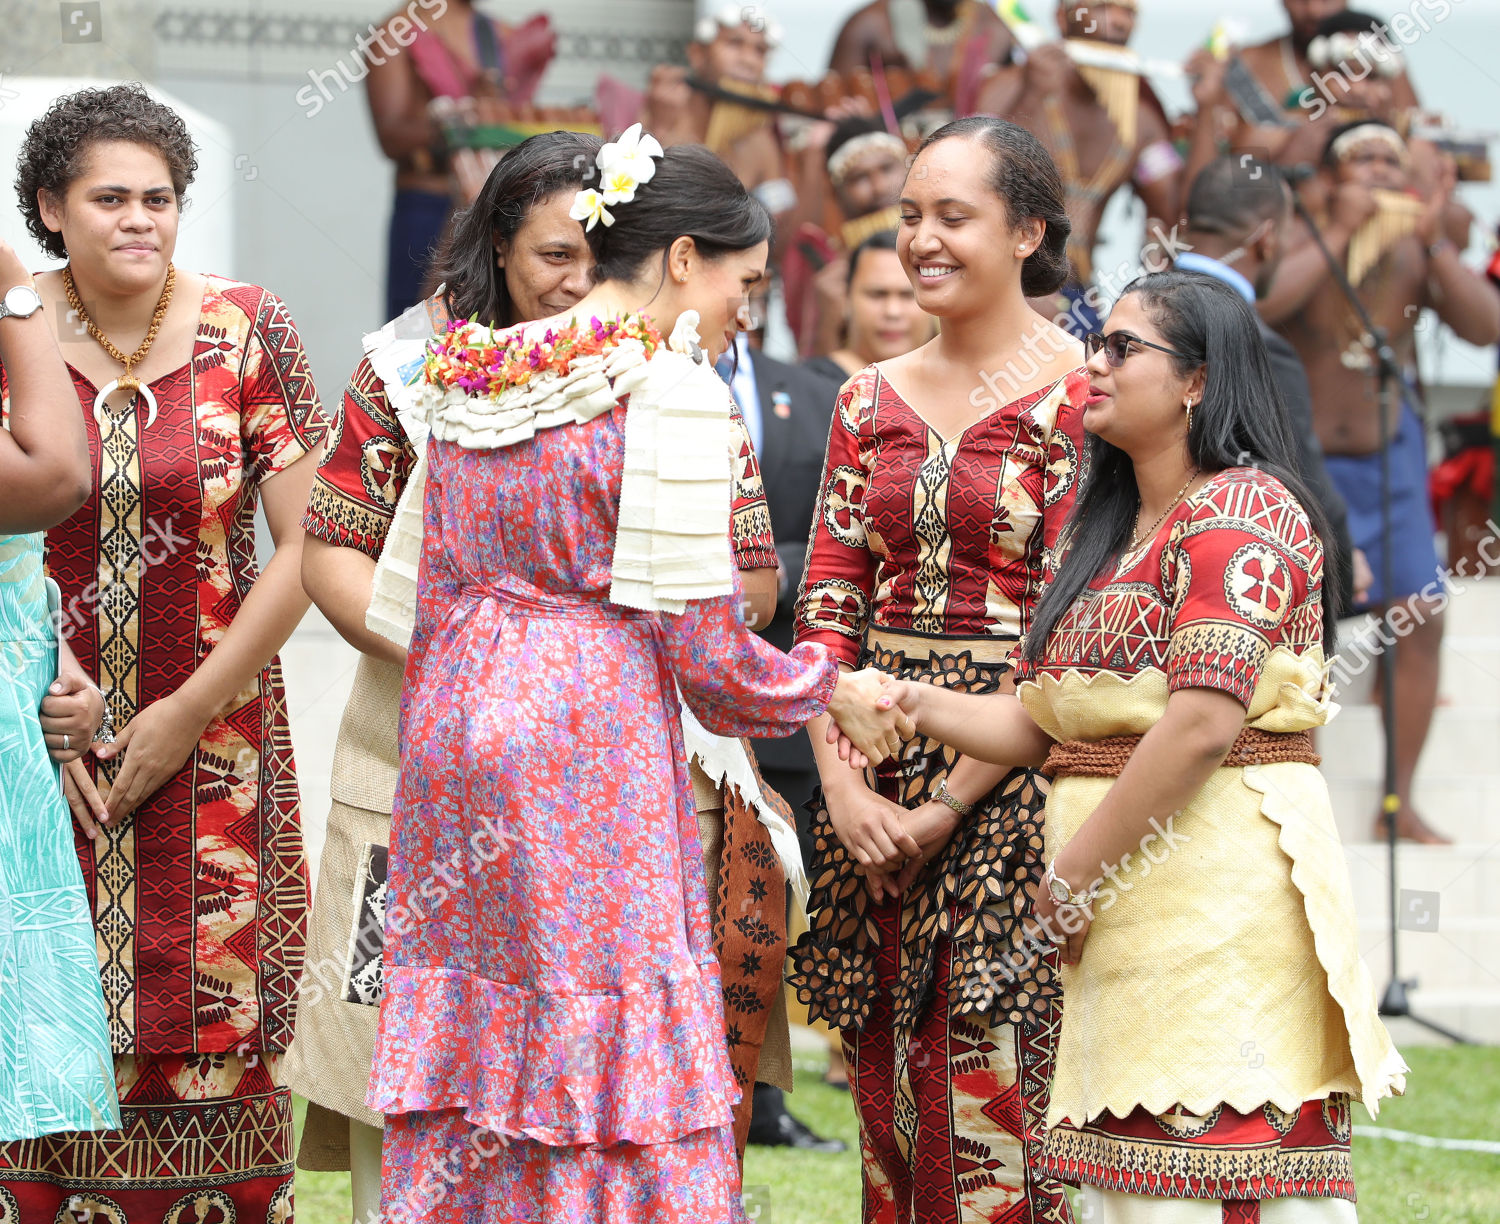 prince-harry-and-meghan-duchess-of-sussex-tour-of-fiji-shutterstock-editorial-9942745bw.jpg